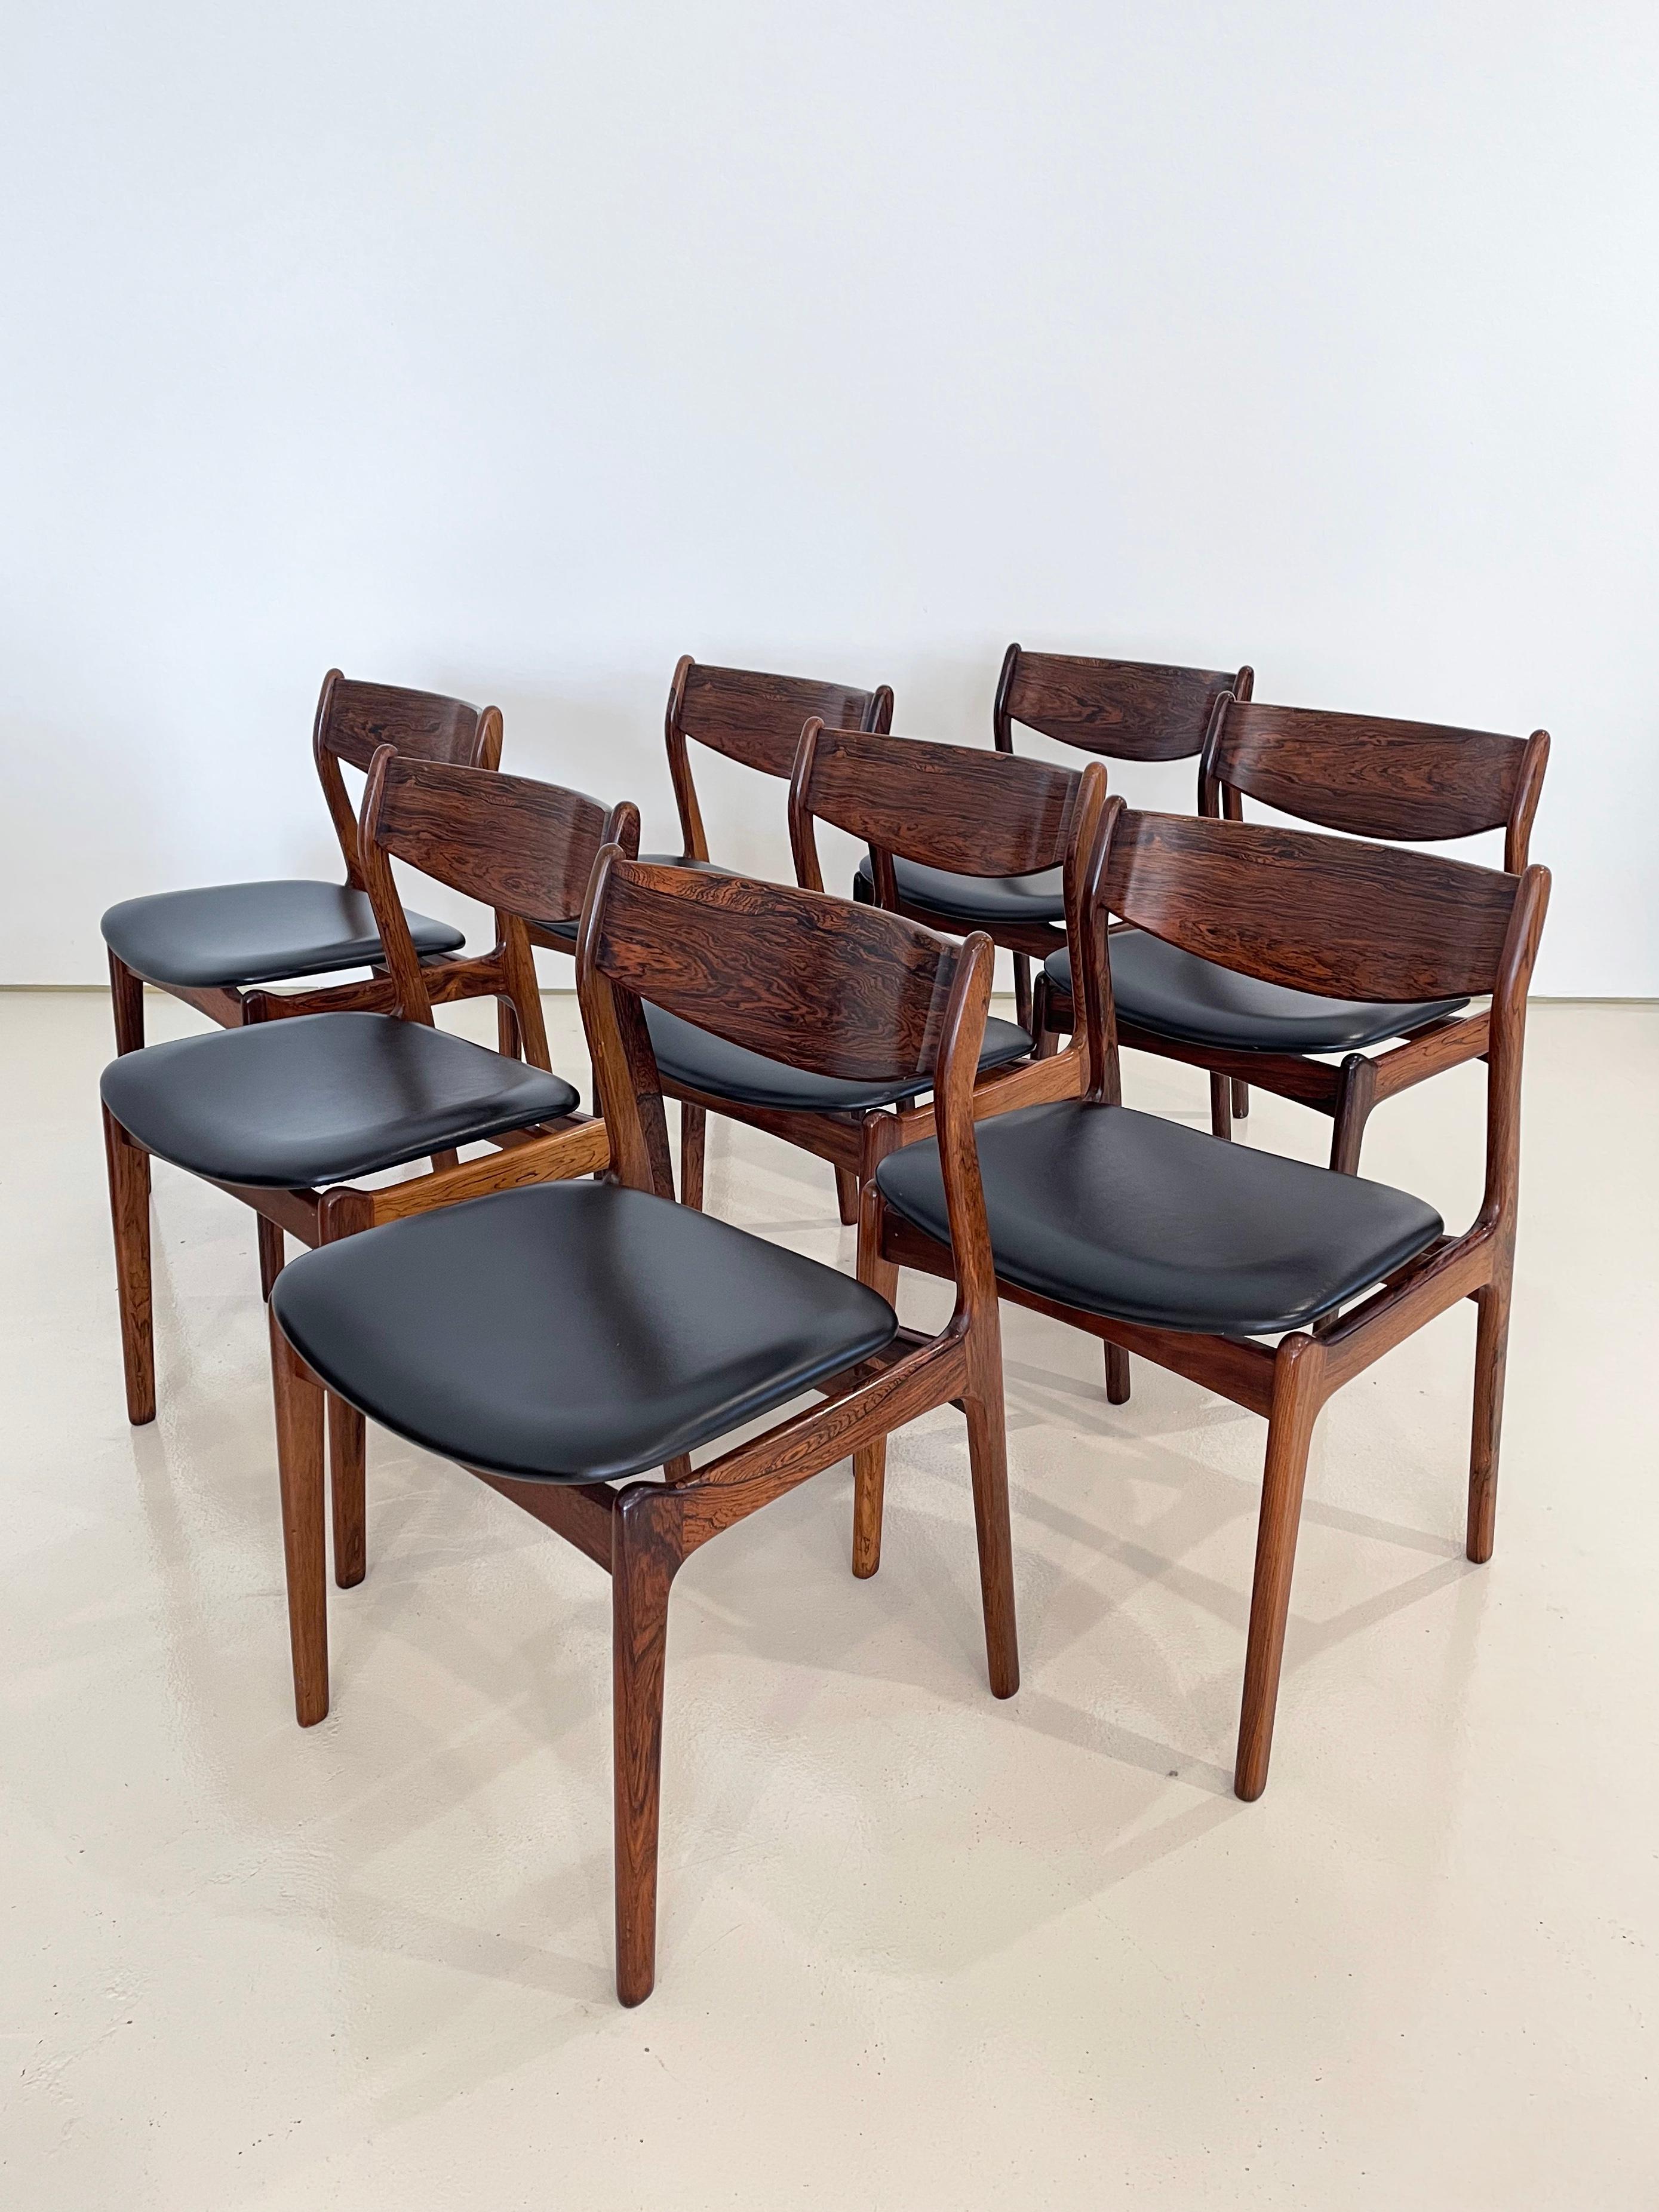 Manufactured in the 1950s by Farso Stolefarik in Denmark

Designed by P.E. Jorgensen

Set of 8.

Each chair is crafted of Brazilian rosewood with dark figured grains

Upholstered seats and backs are believed to be original and in near mint